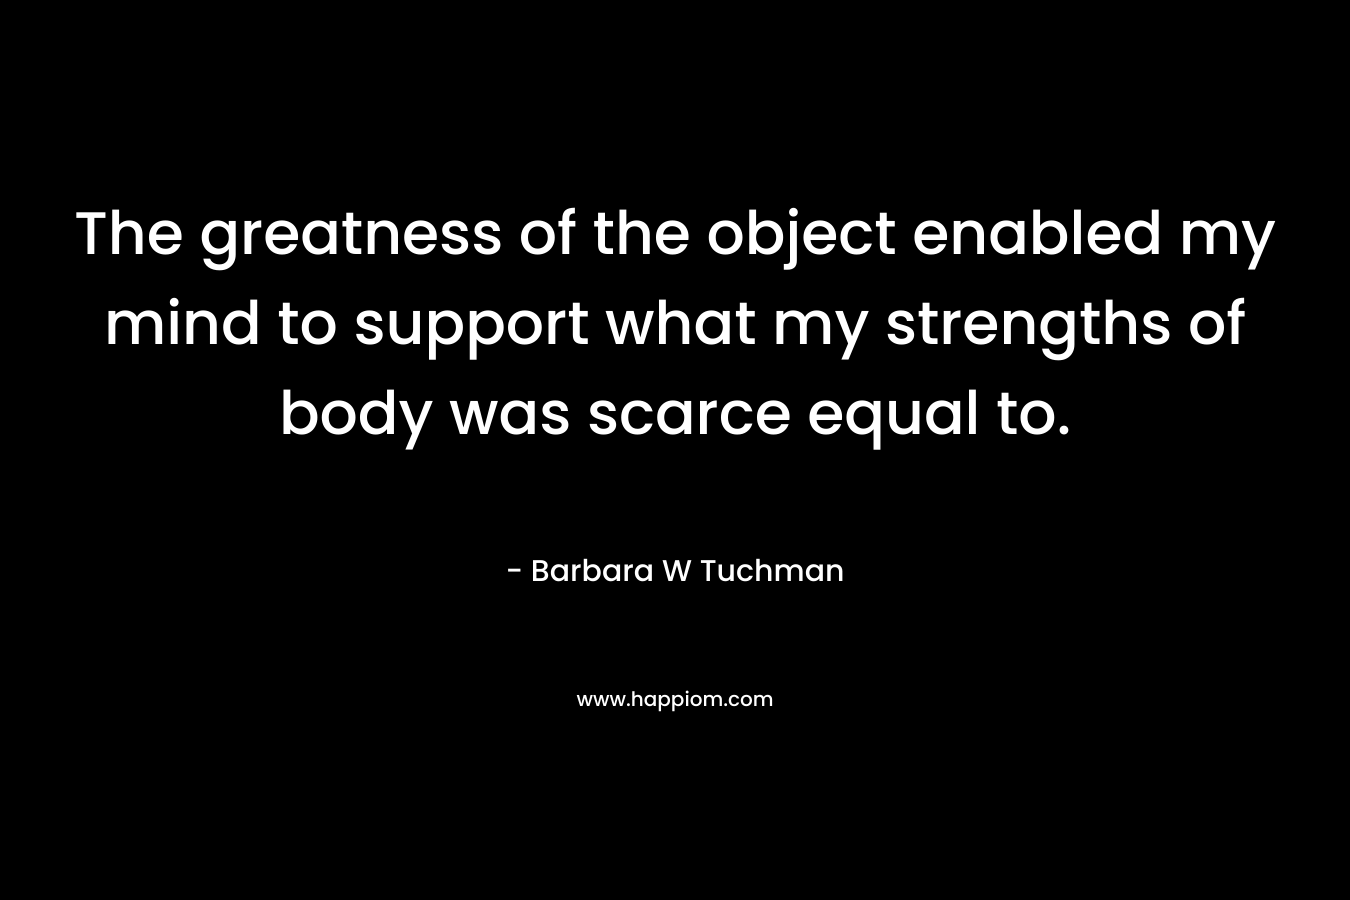 The greatness of the object enabled my mind to support what my strengths of body was scarce equal to.